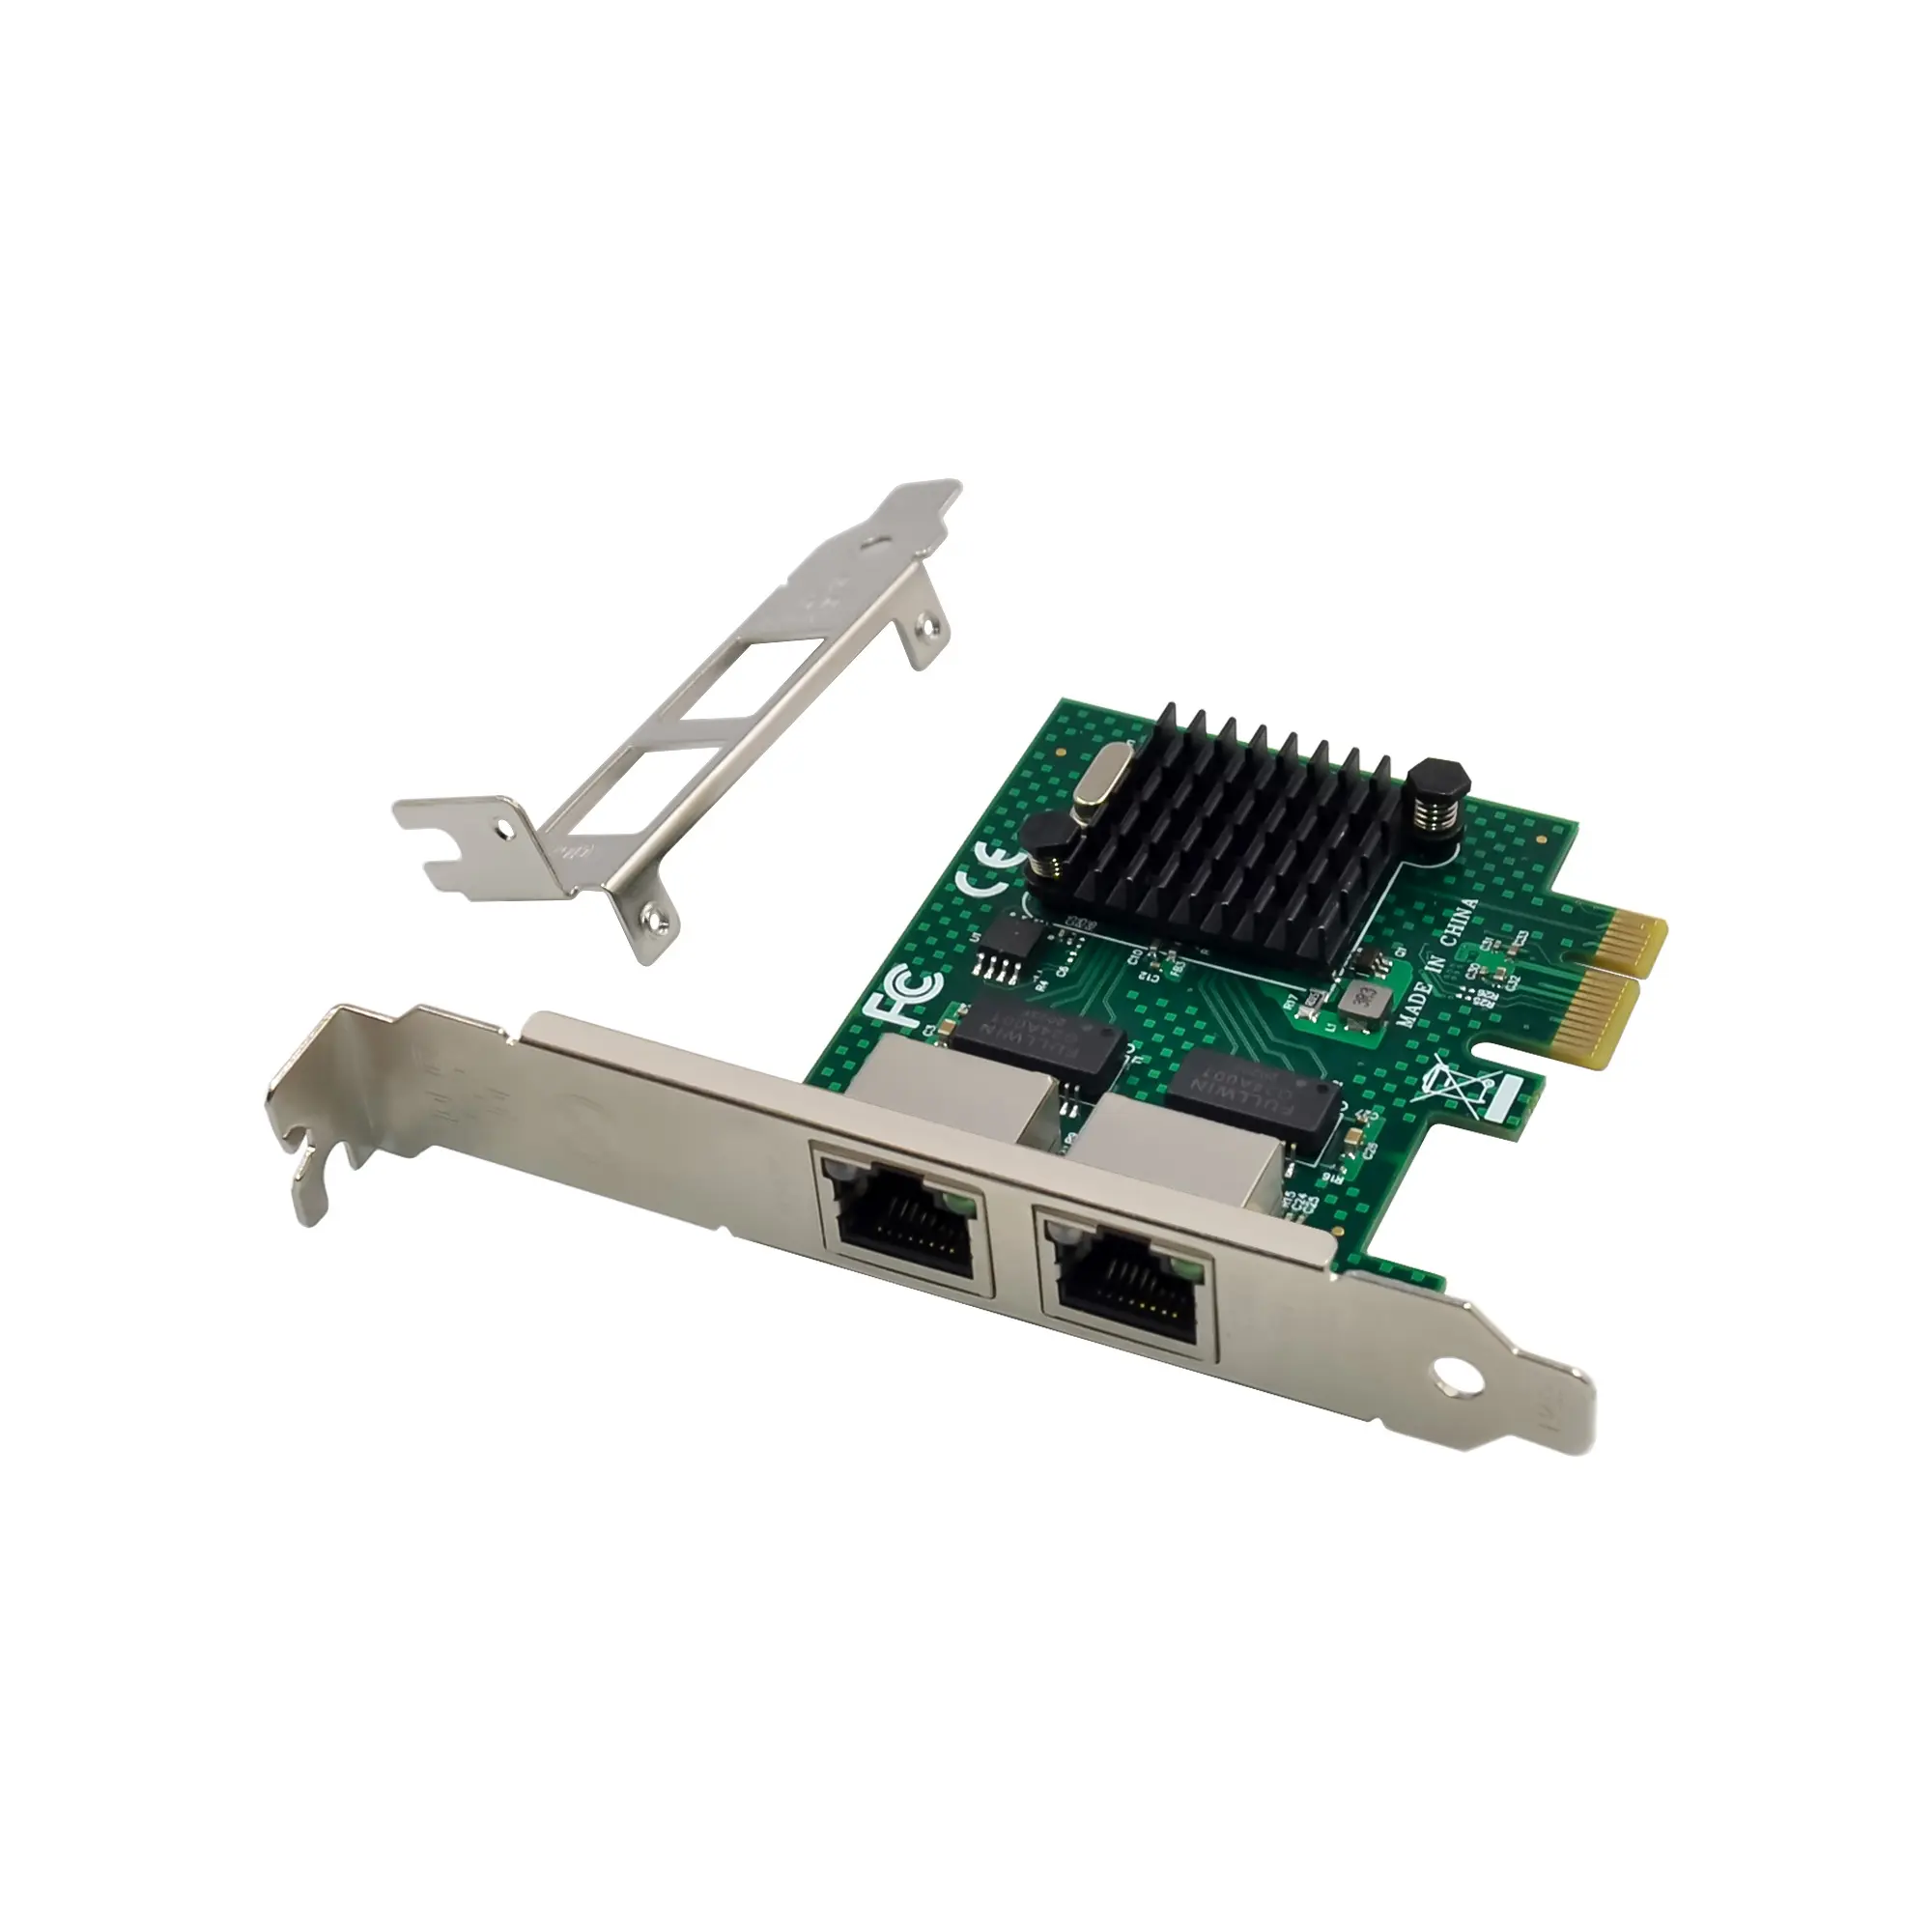 ST7284 BCM5718 X1 Dual 10/100/1000 RJ45 Port 1Gb PCI Express Network Cards Adapter for Desktop